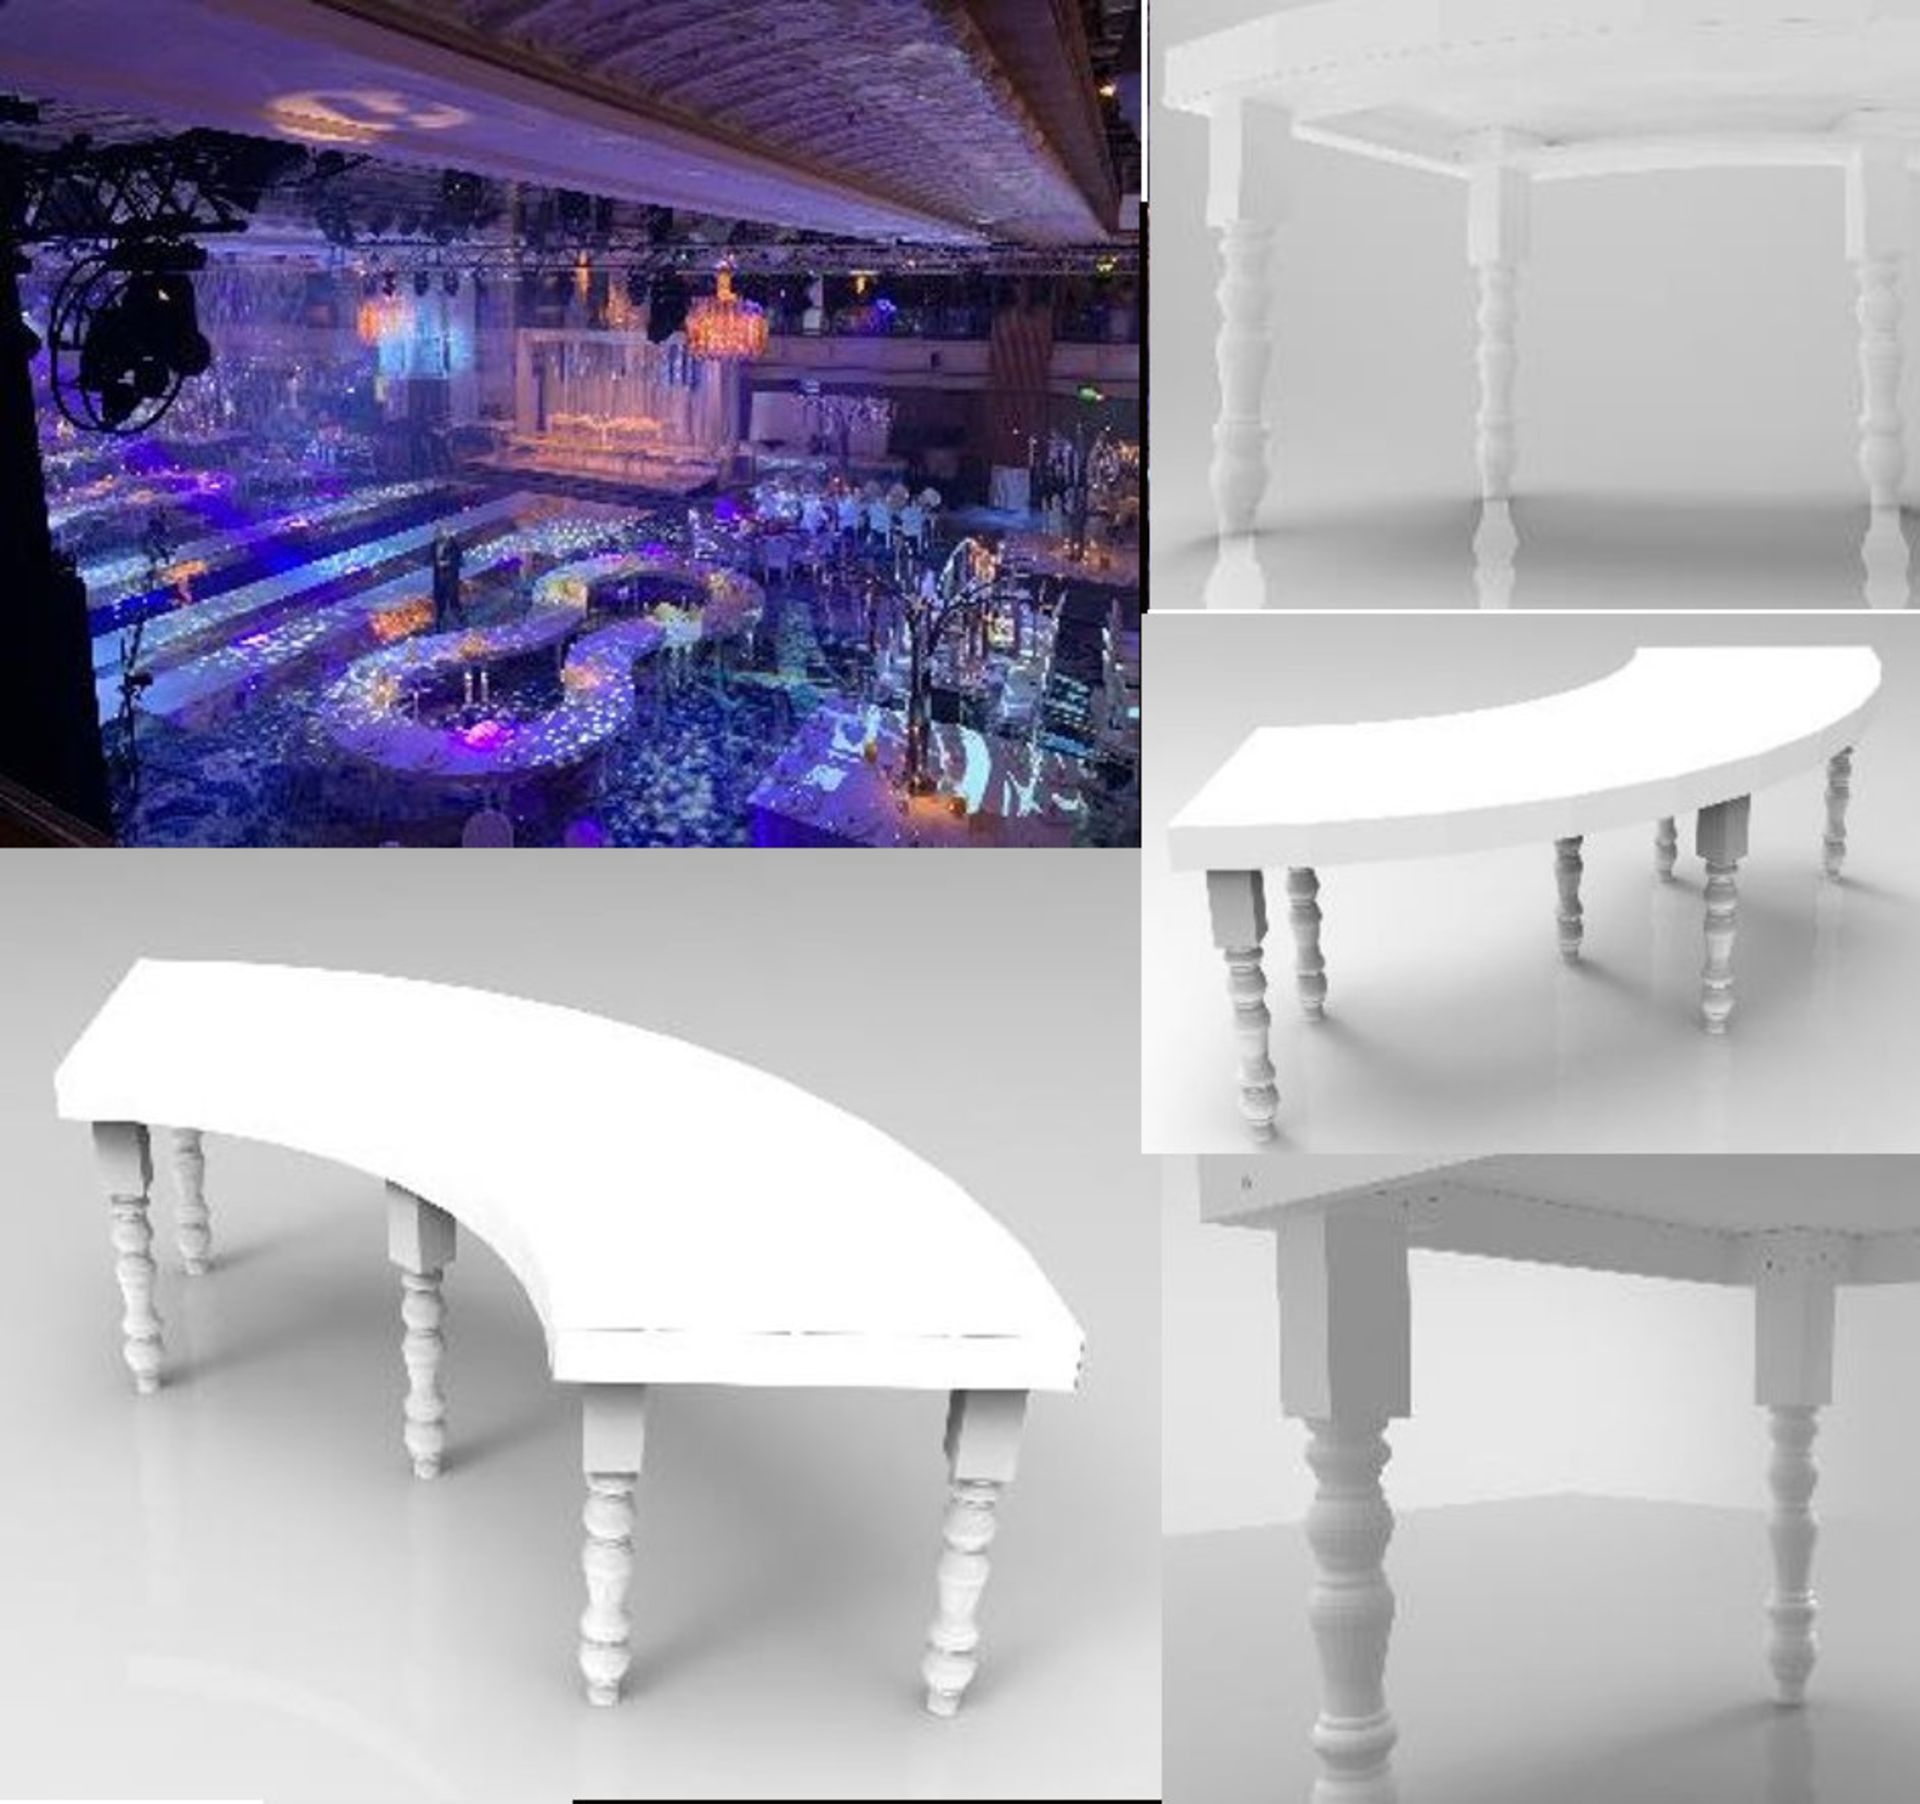 3 x Bespoke Curved Event/Dining Tables With A Laminate Finish - Great For Wedding Venues